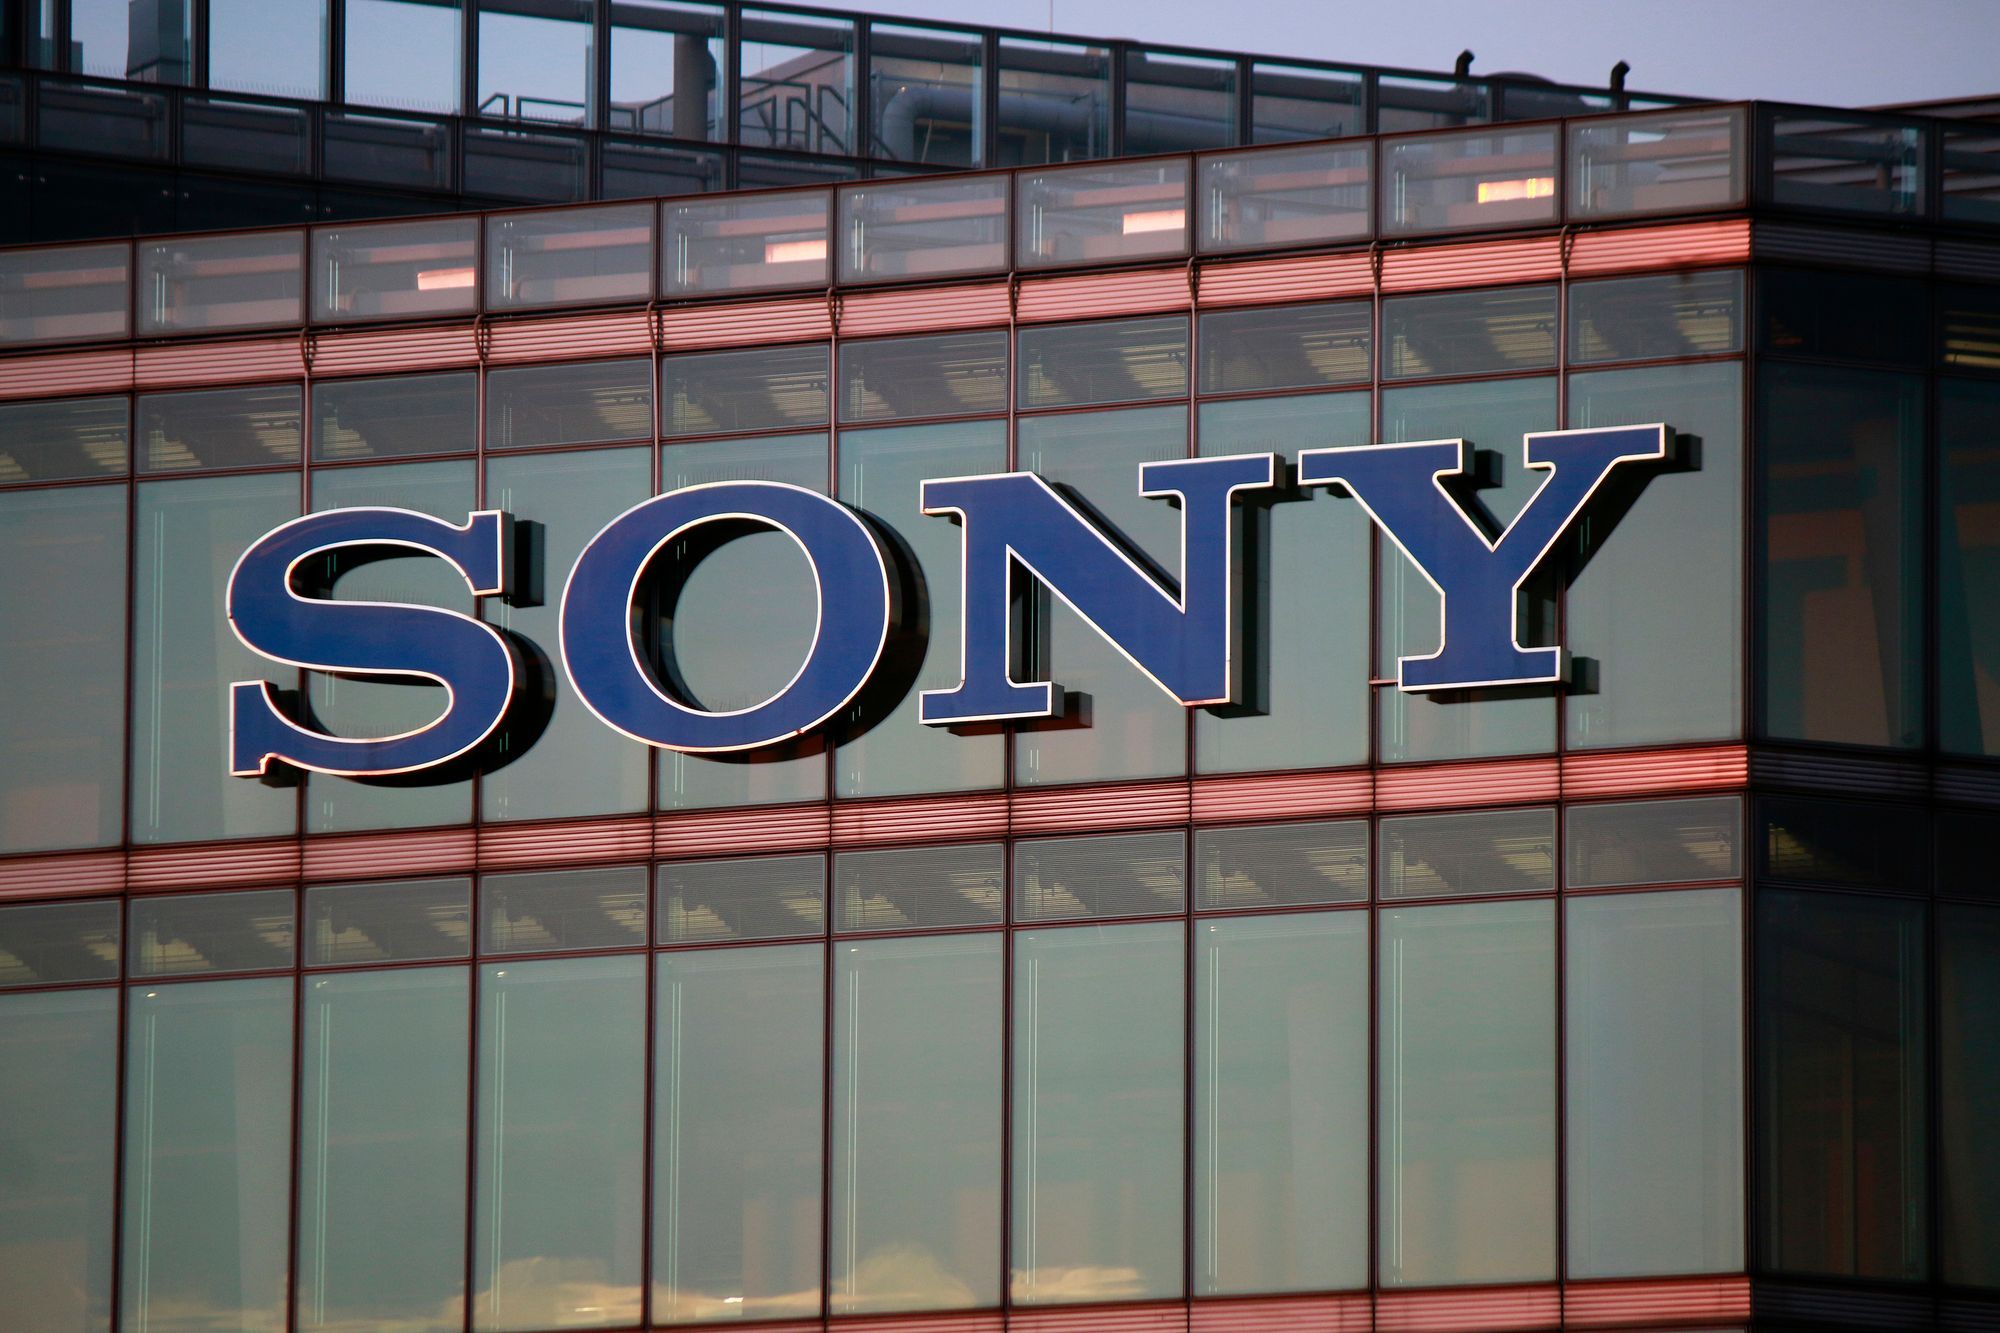 Sony building regarding the warranty class action lawsuit filed against the company over not paying shipping costs